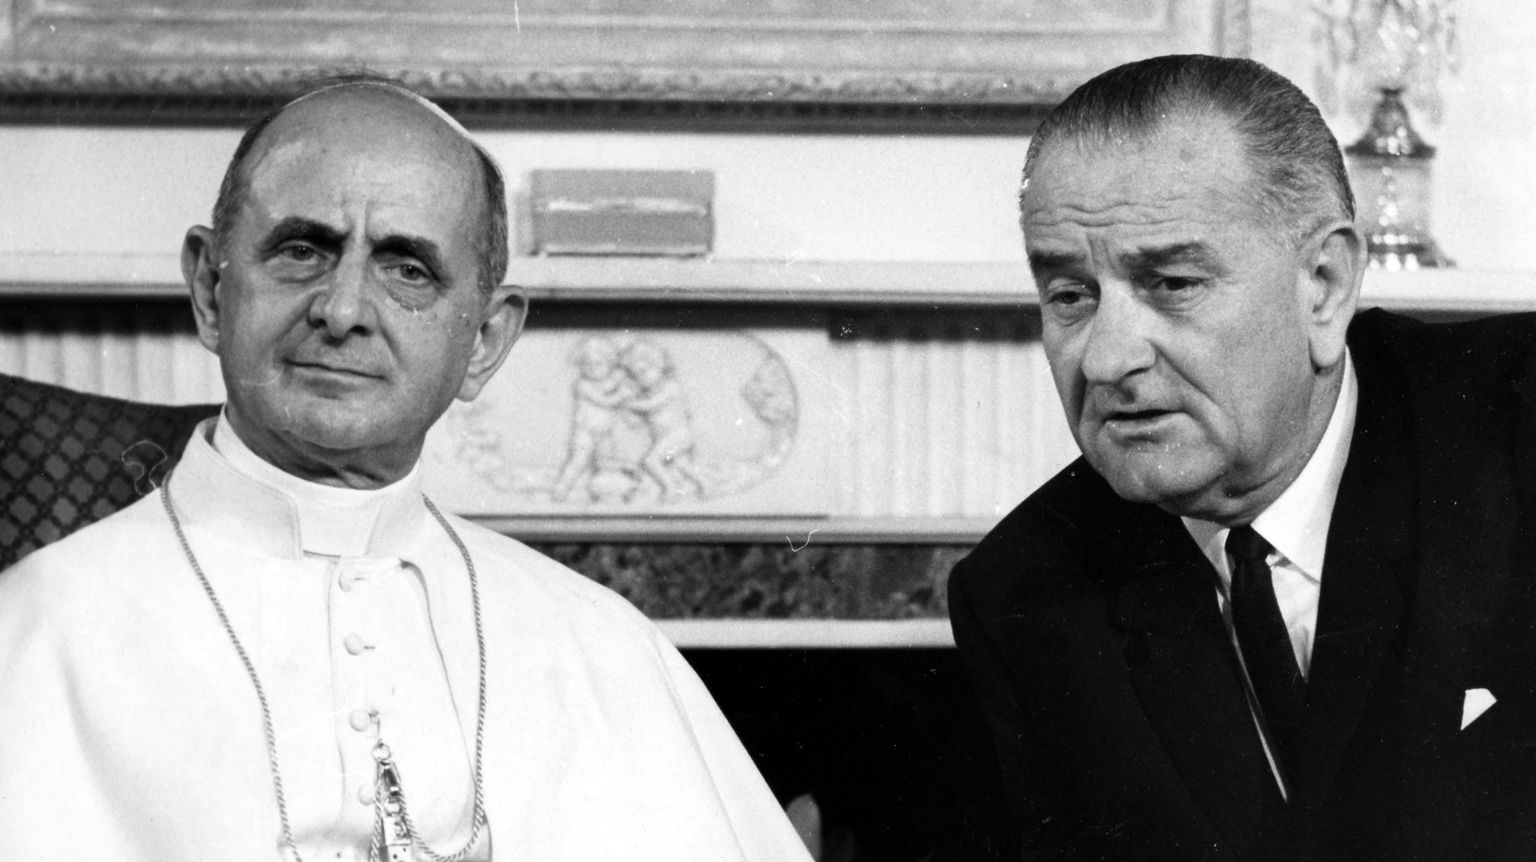 Historic papal visits to the U.S.